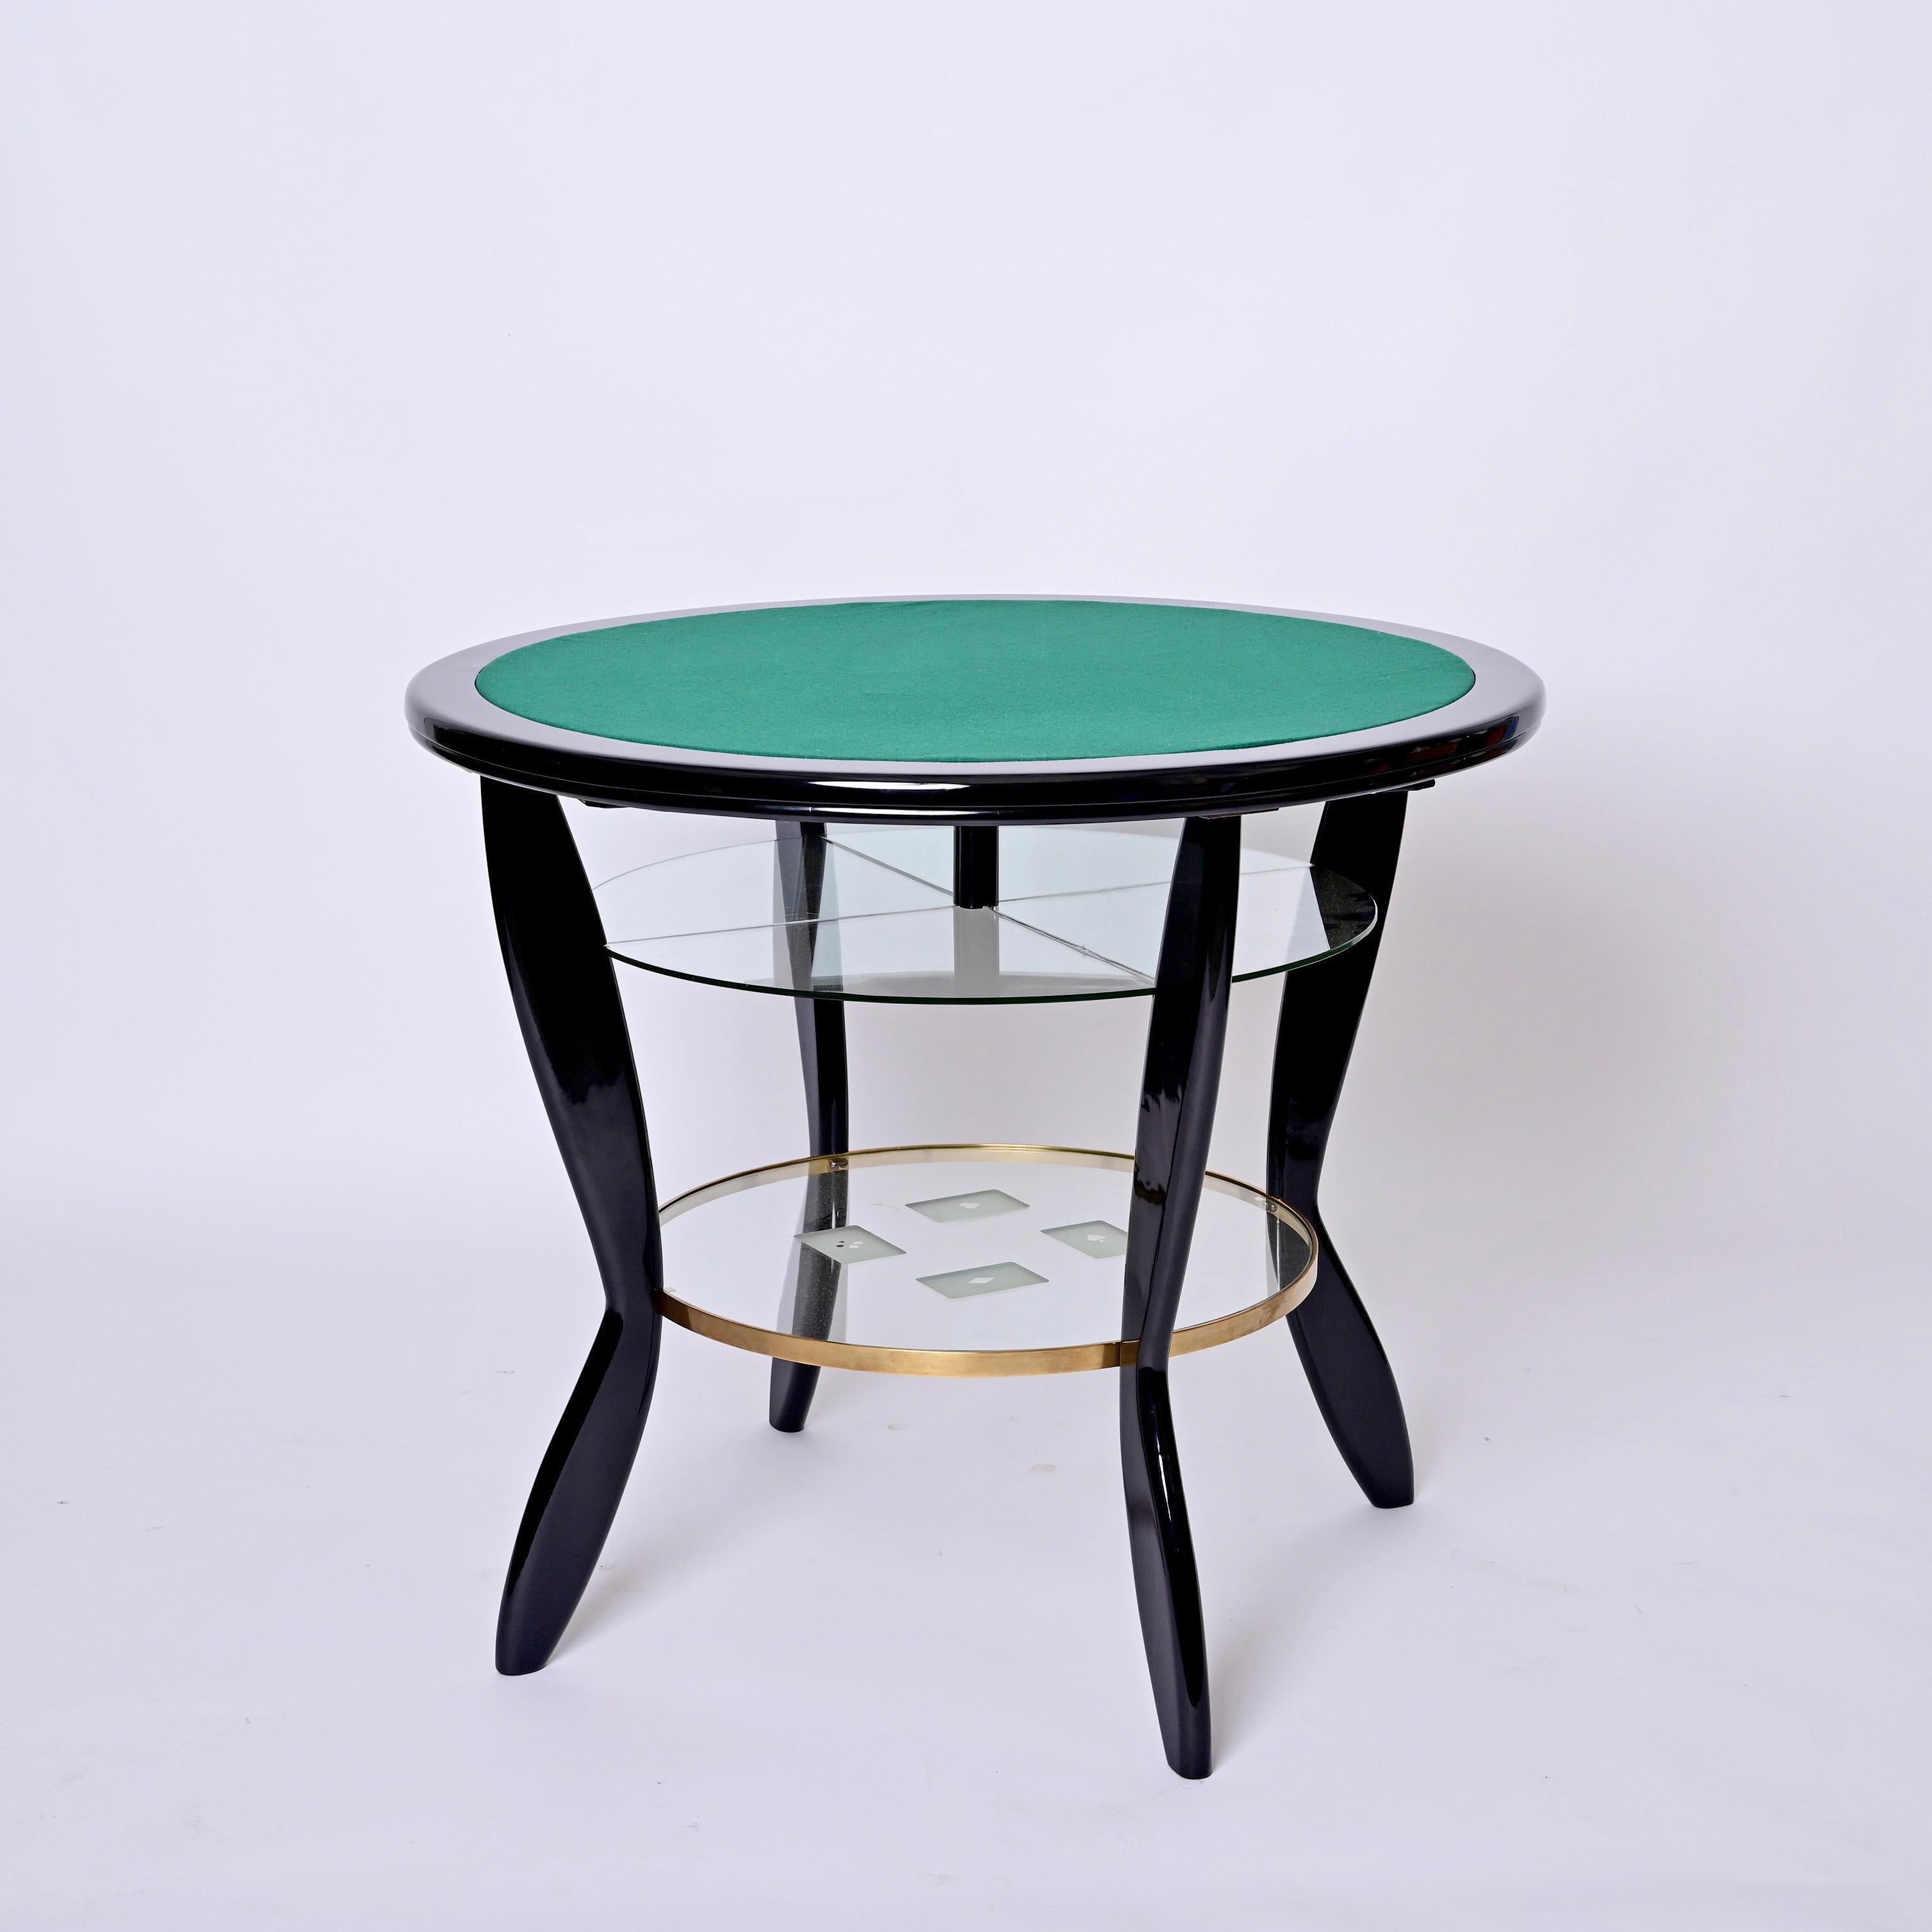 20th Century Gio Ponti Style Ebonized Beech and Brass Italian Game Table with Glass, 1950s For Sale